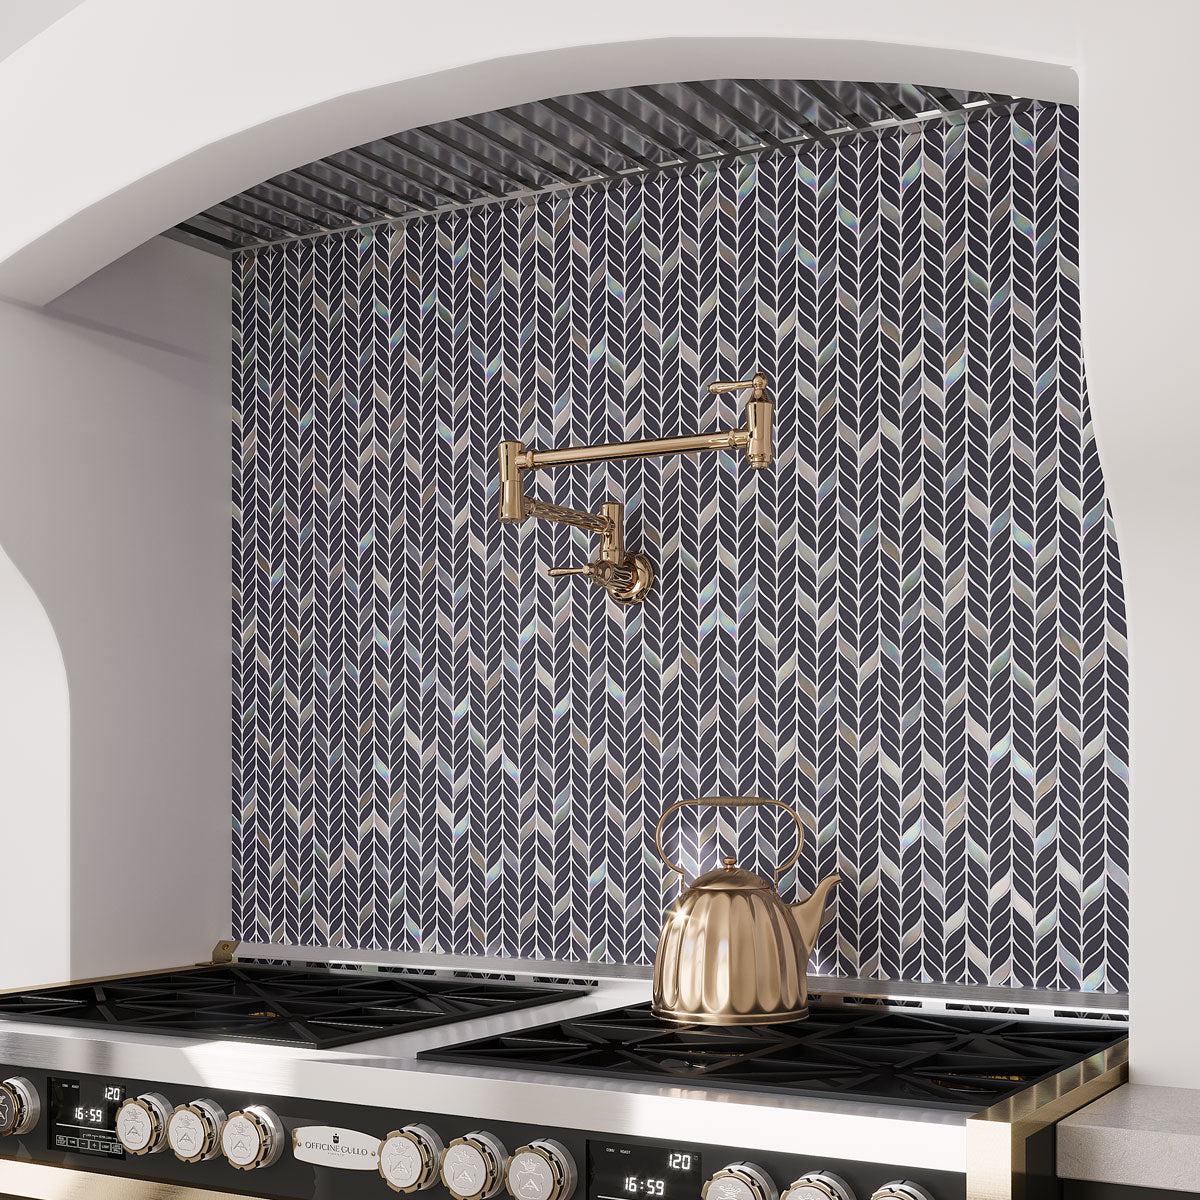 Blue leaf pattern kitchen wall tile made of Recycled Glass